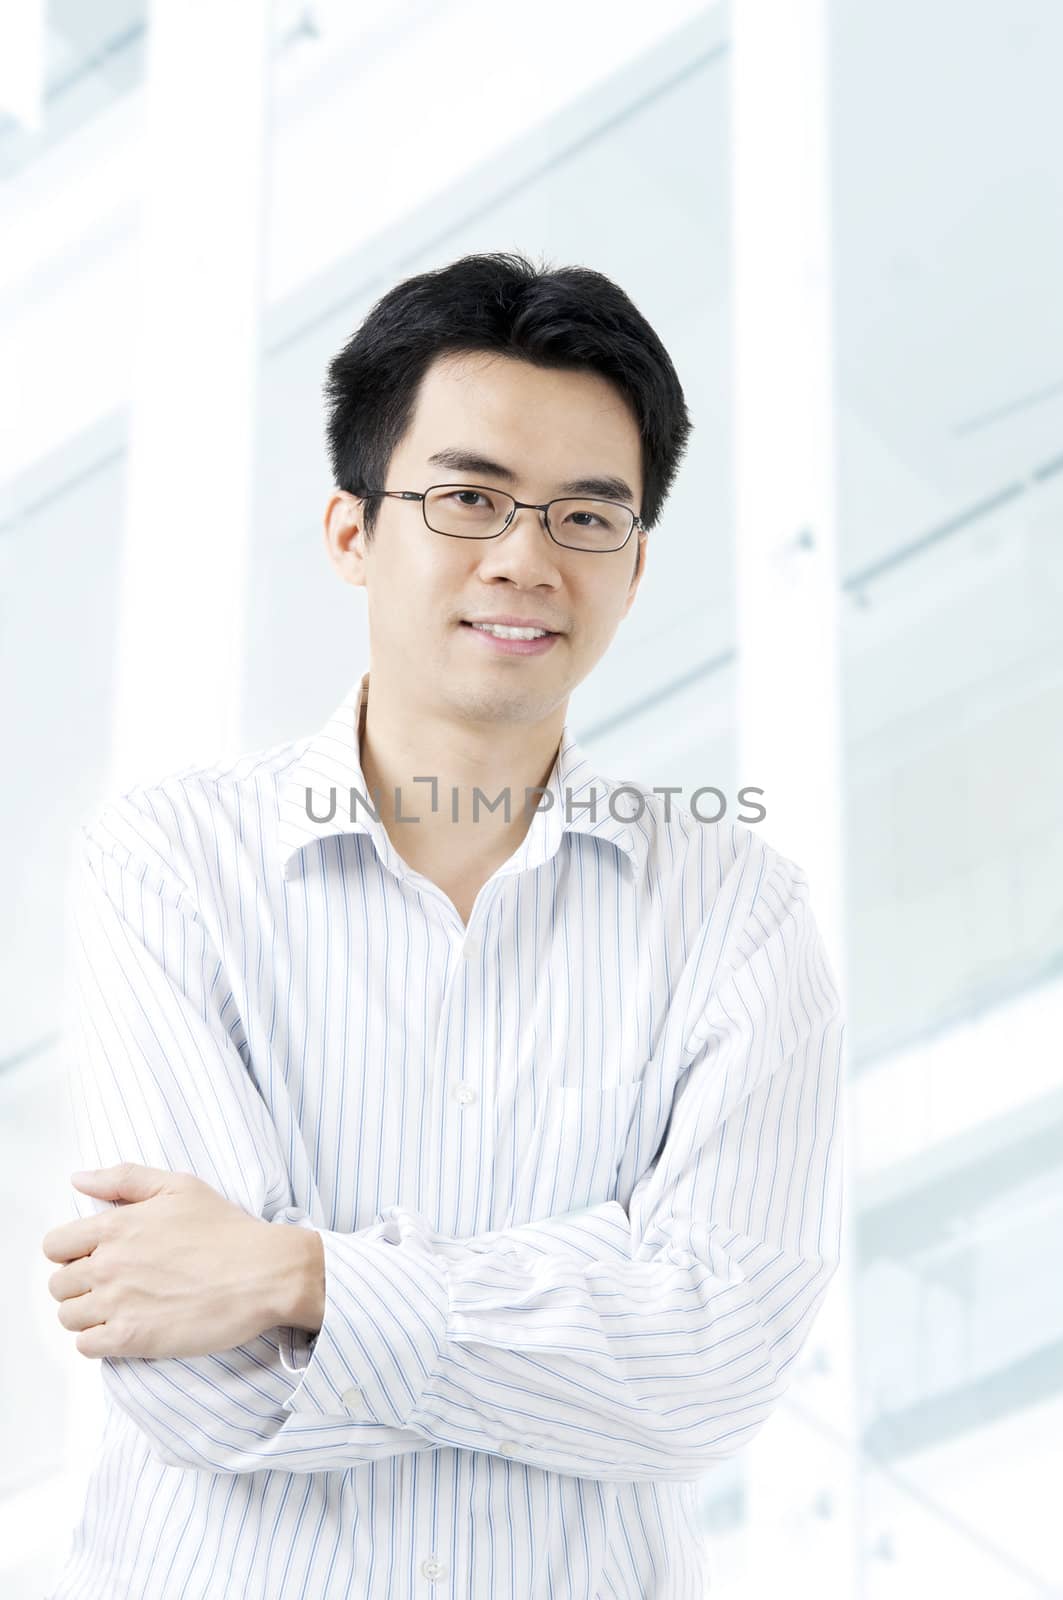 Good looking Asian business man standing with arms folded, building at background.